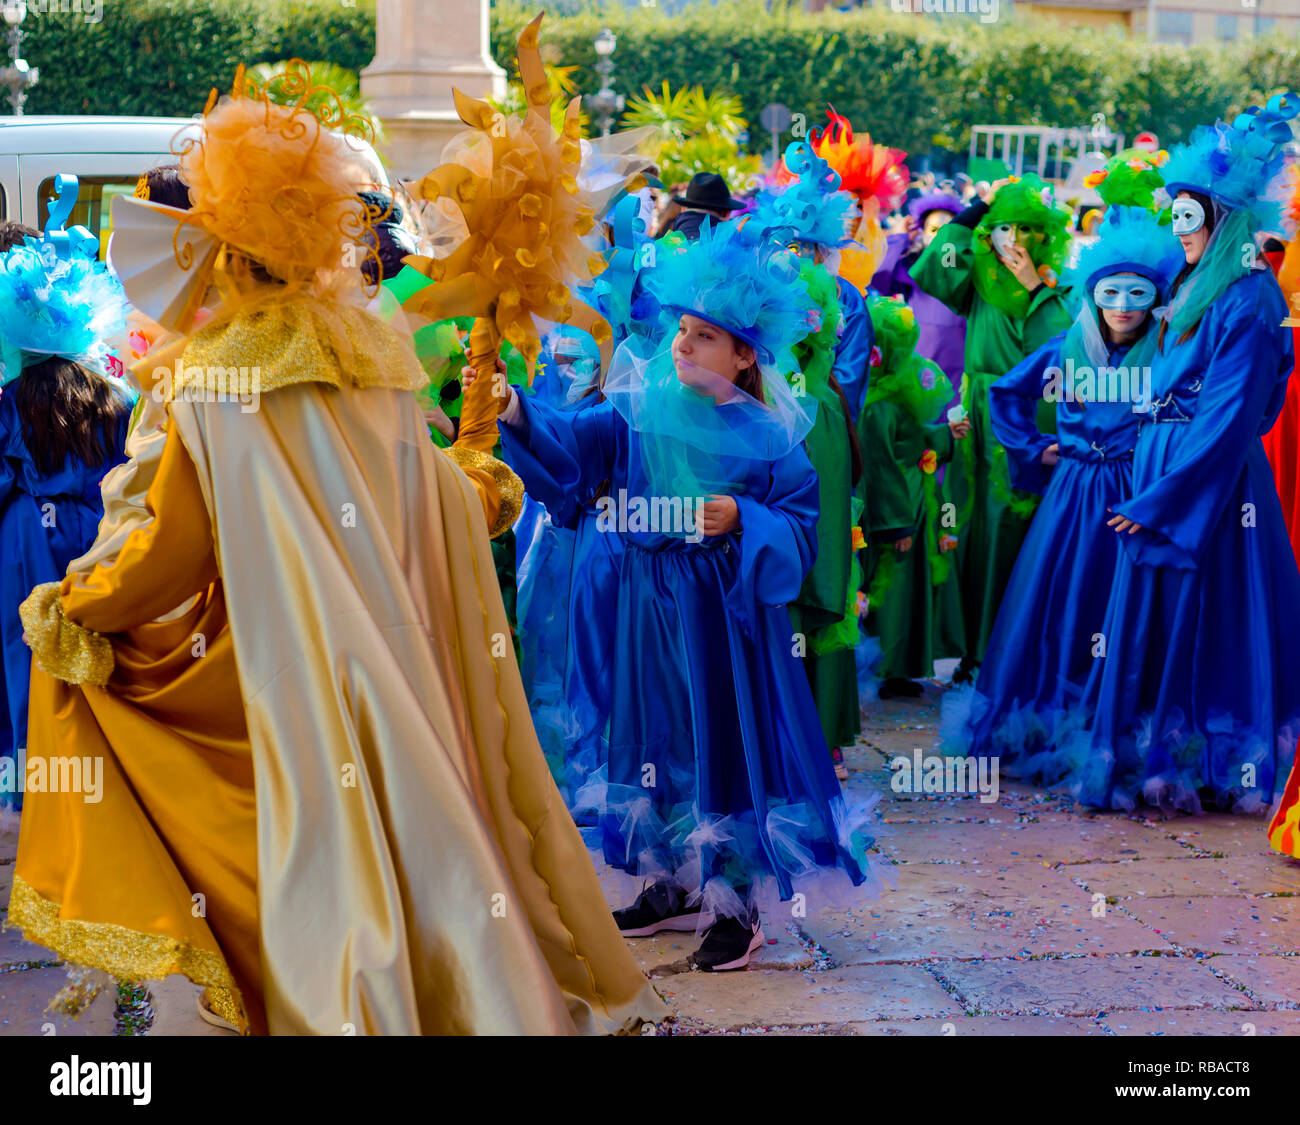 Modugno, Italy - February 4, 2018: Young people and children with beautiful and colorful clothes during the parade of masked groups in the city street Stock Photo